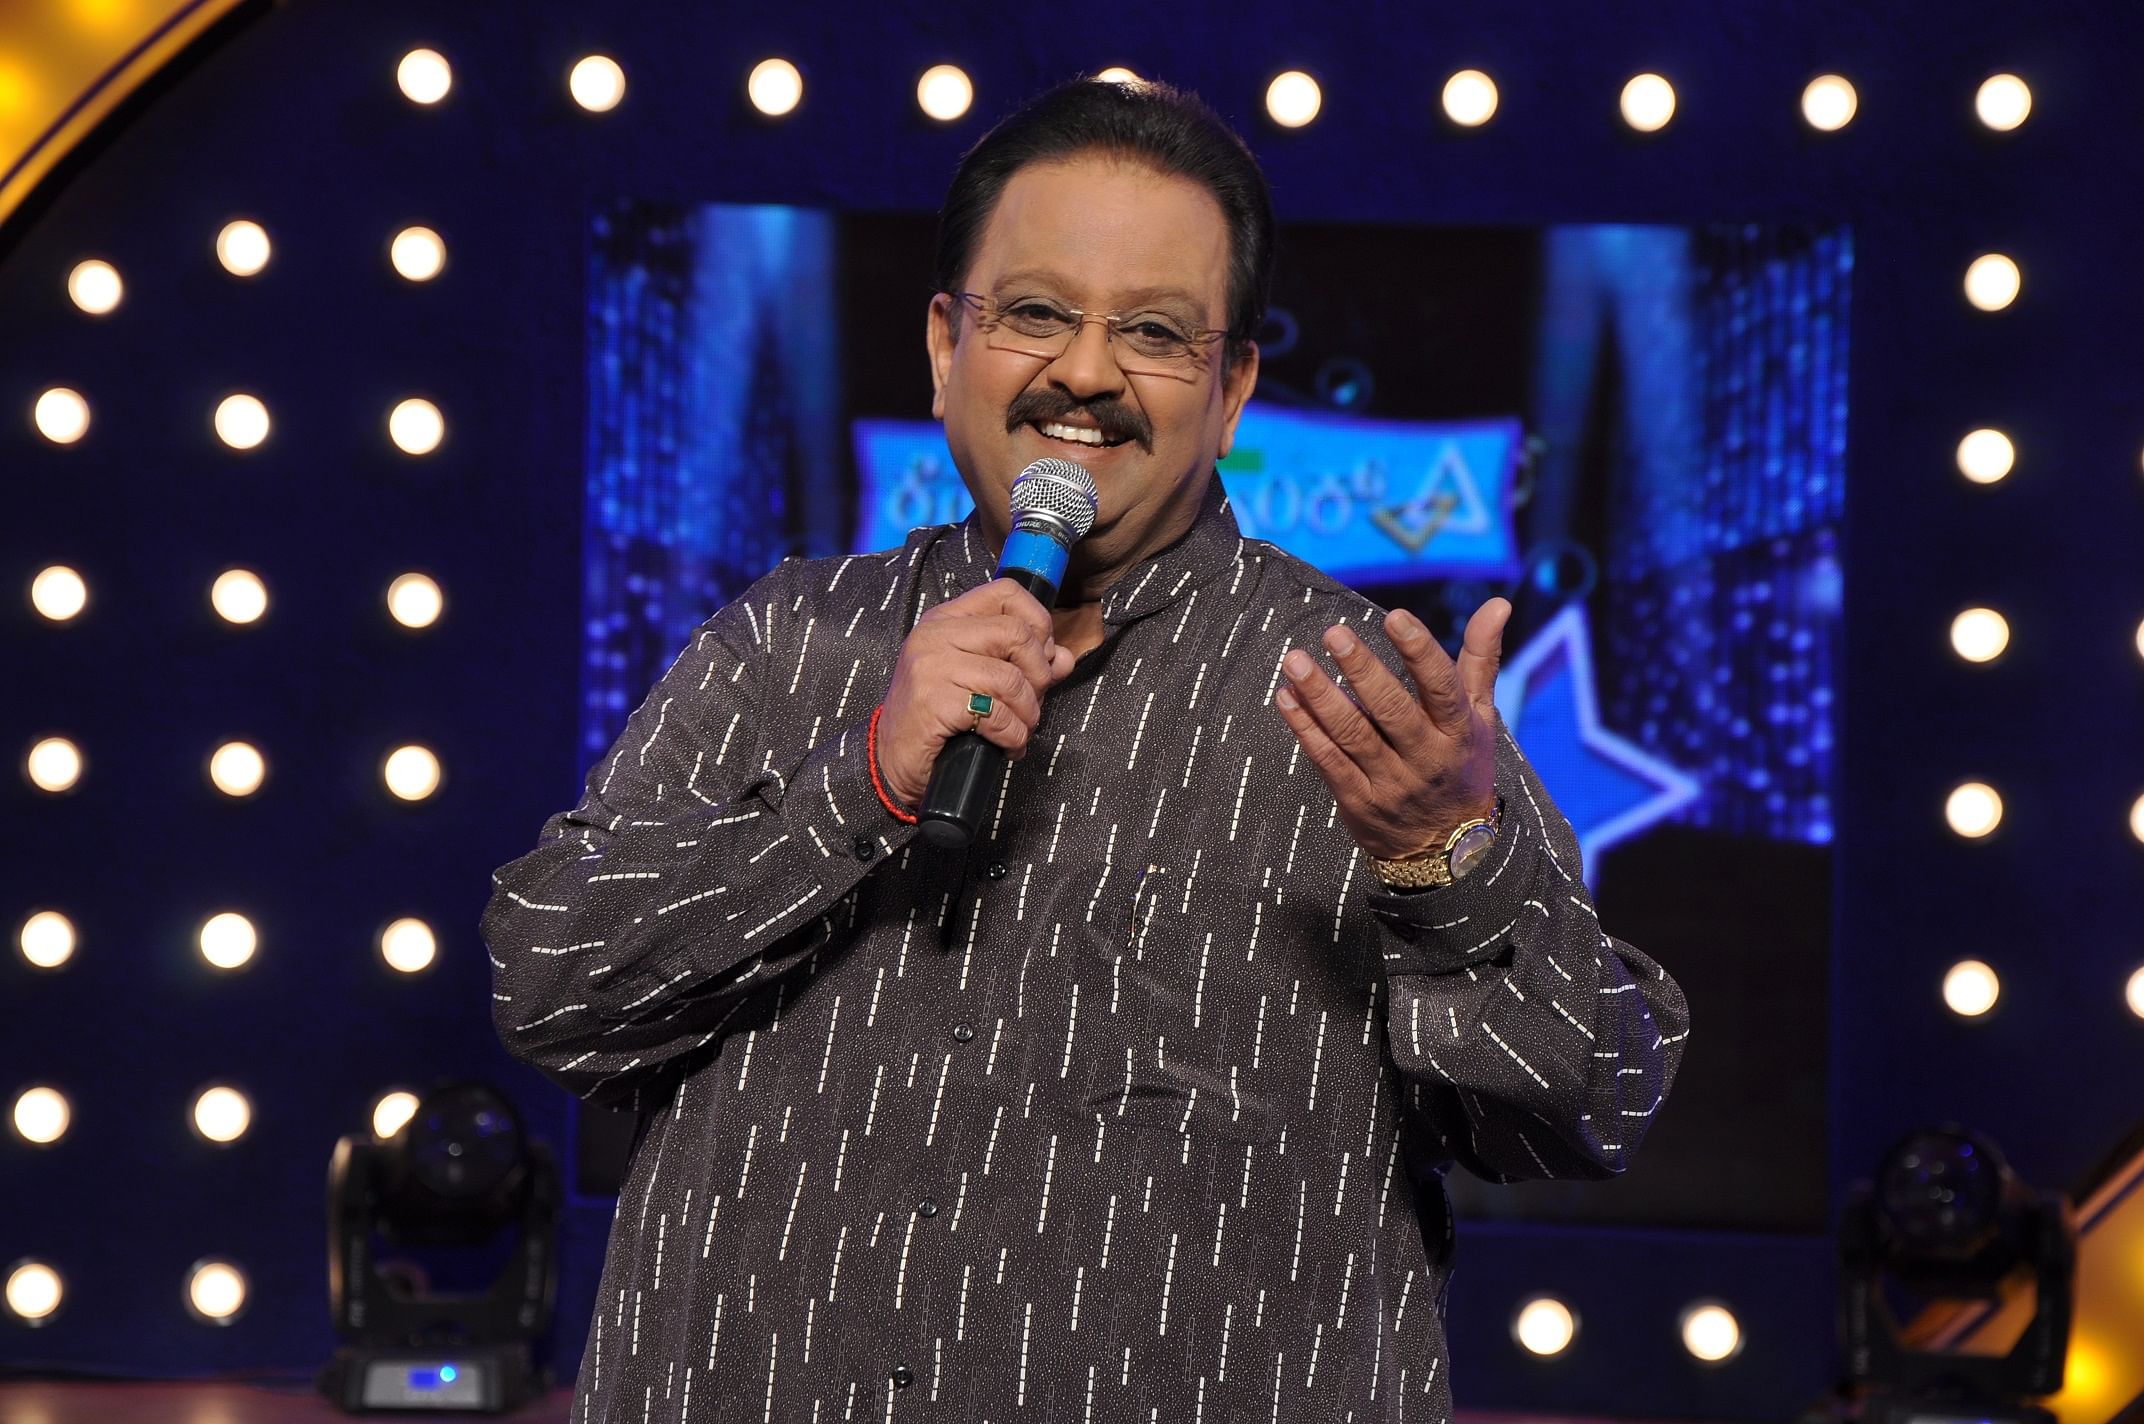 SP Balasubrahmanyam donned the role of a host, judge and mentor at ‘Ede Thumbi Haaduvenu’. Covid-19 claimed the legendary singer last year. PHOTO BY RAVIPRASAD